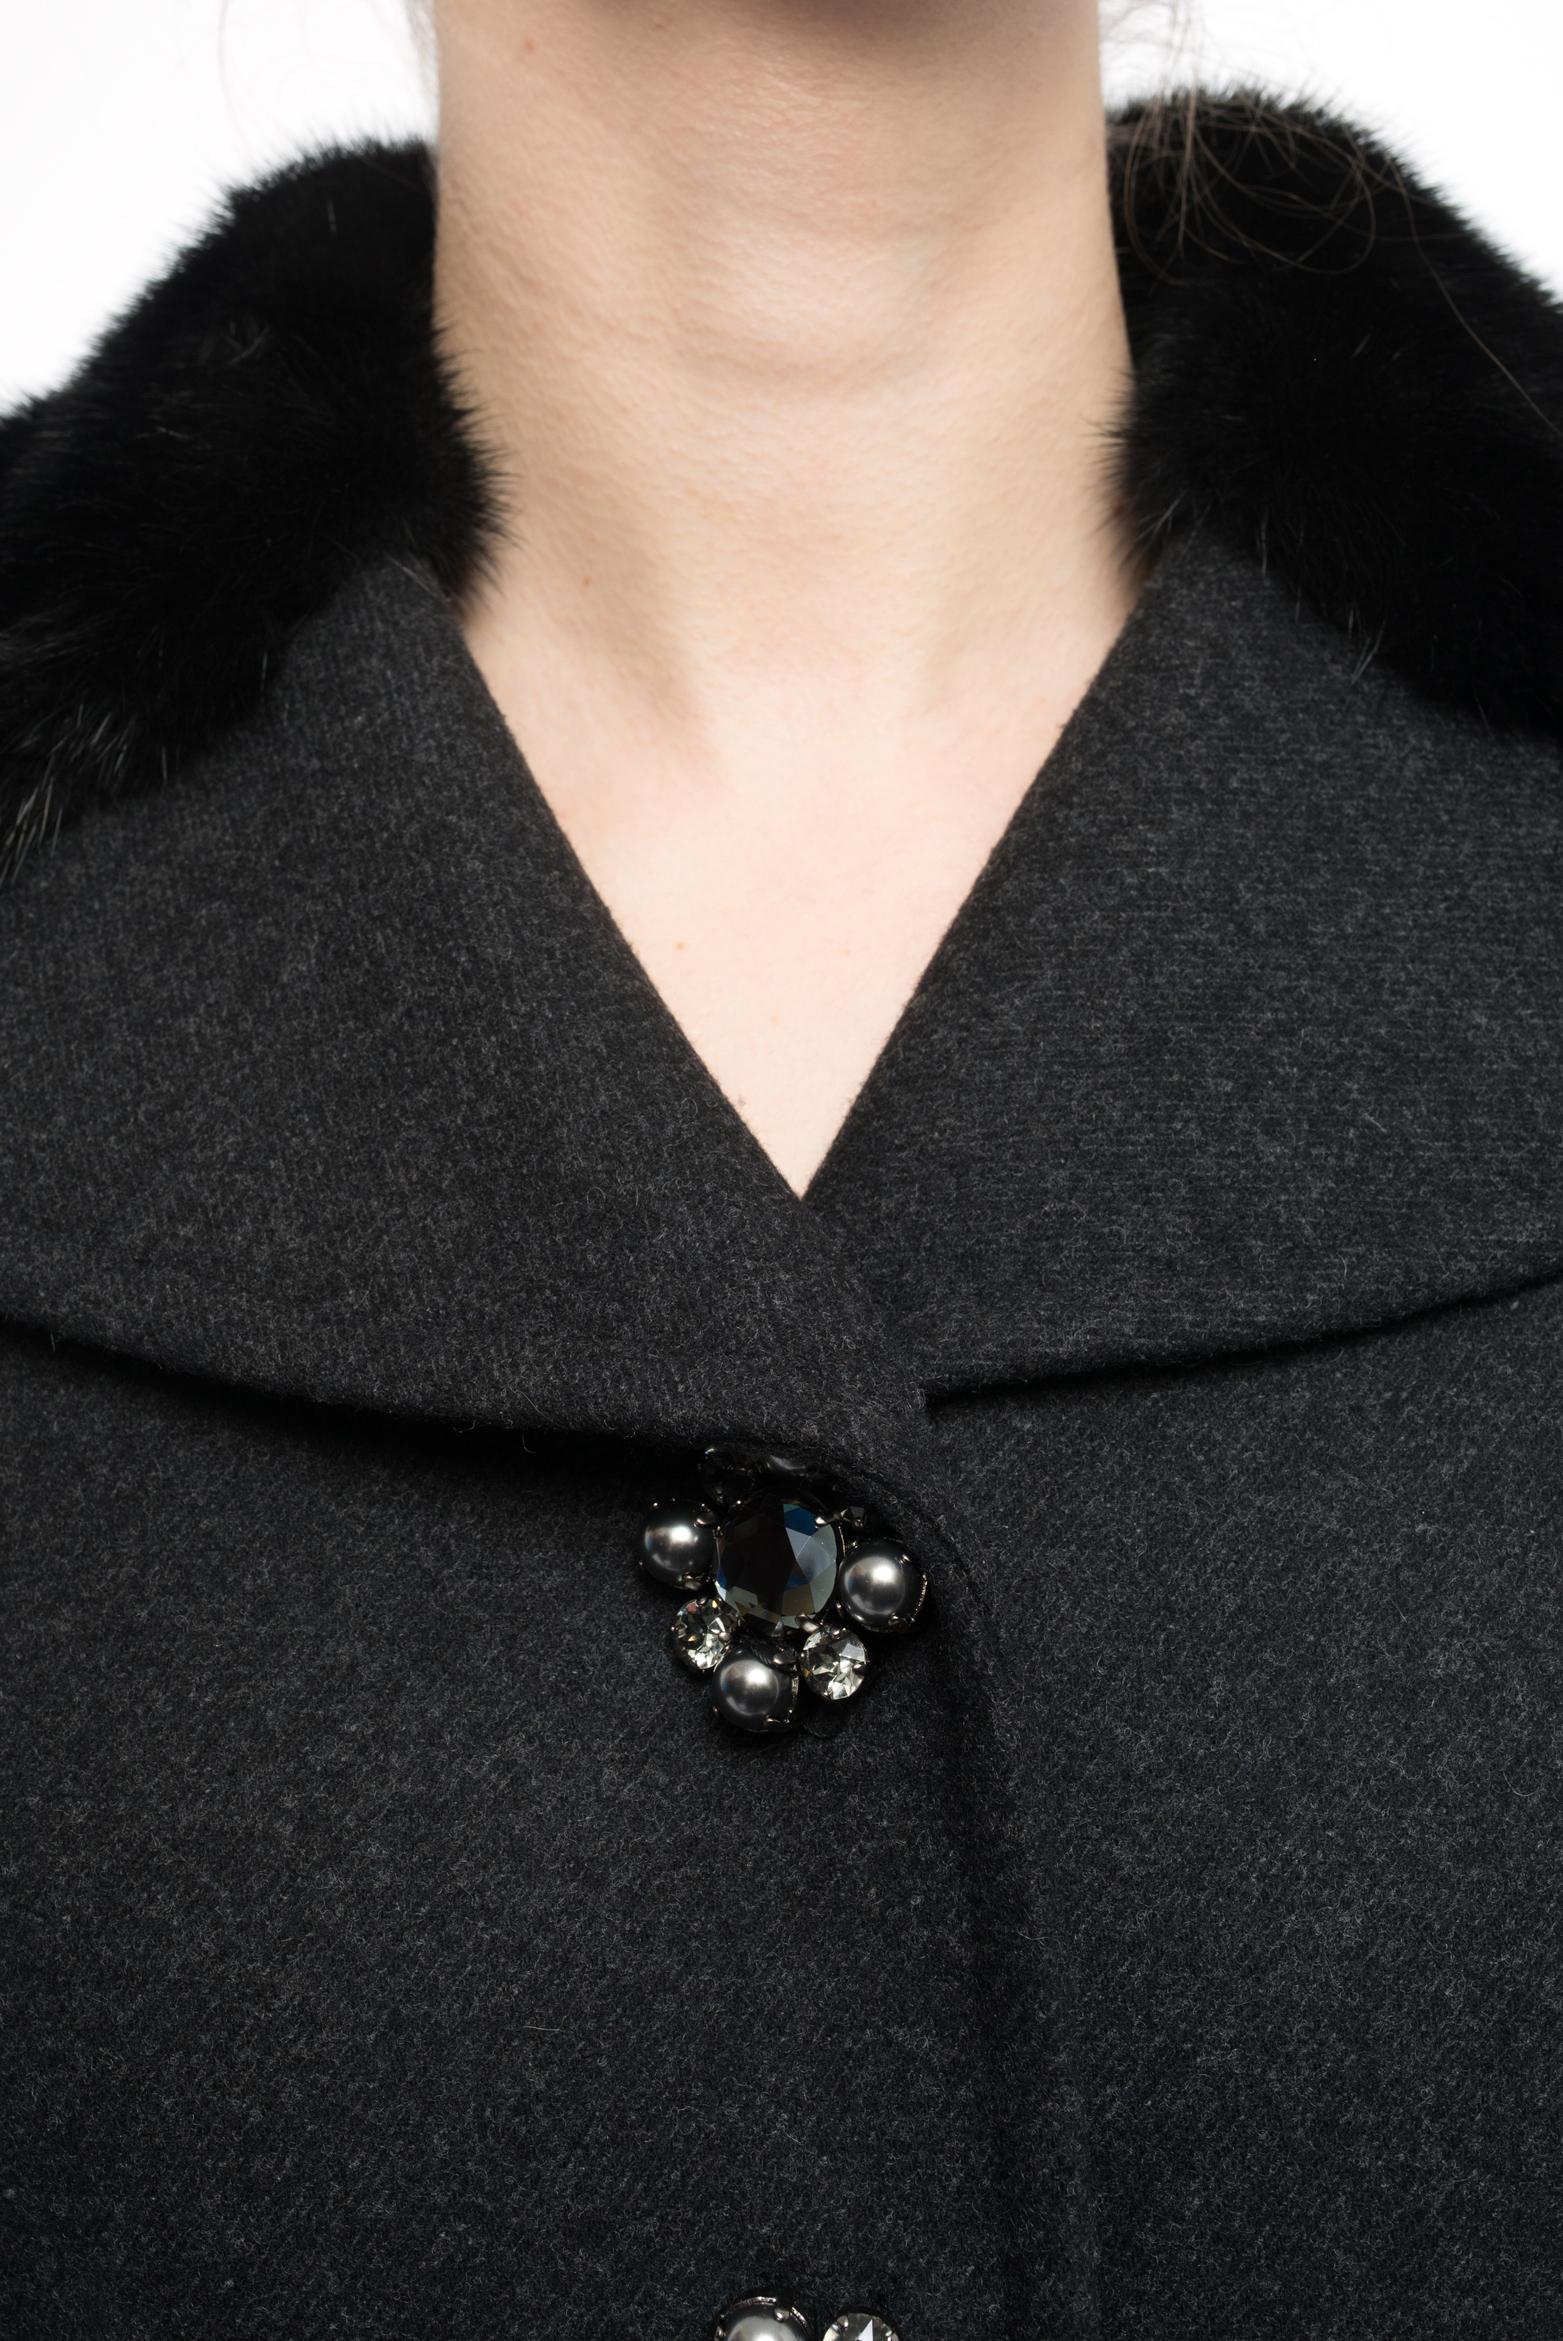 Dolce & Gabbana Charcoal Grey Mink Collar Wool Coat with Jewel Buttons - S 1